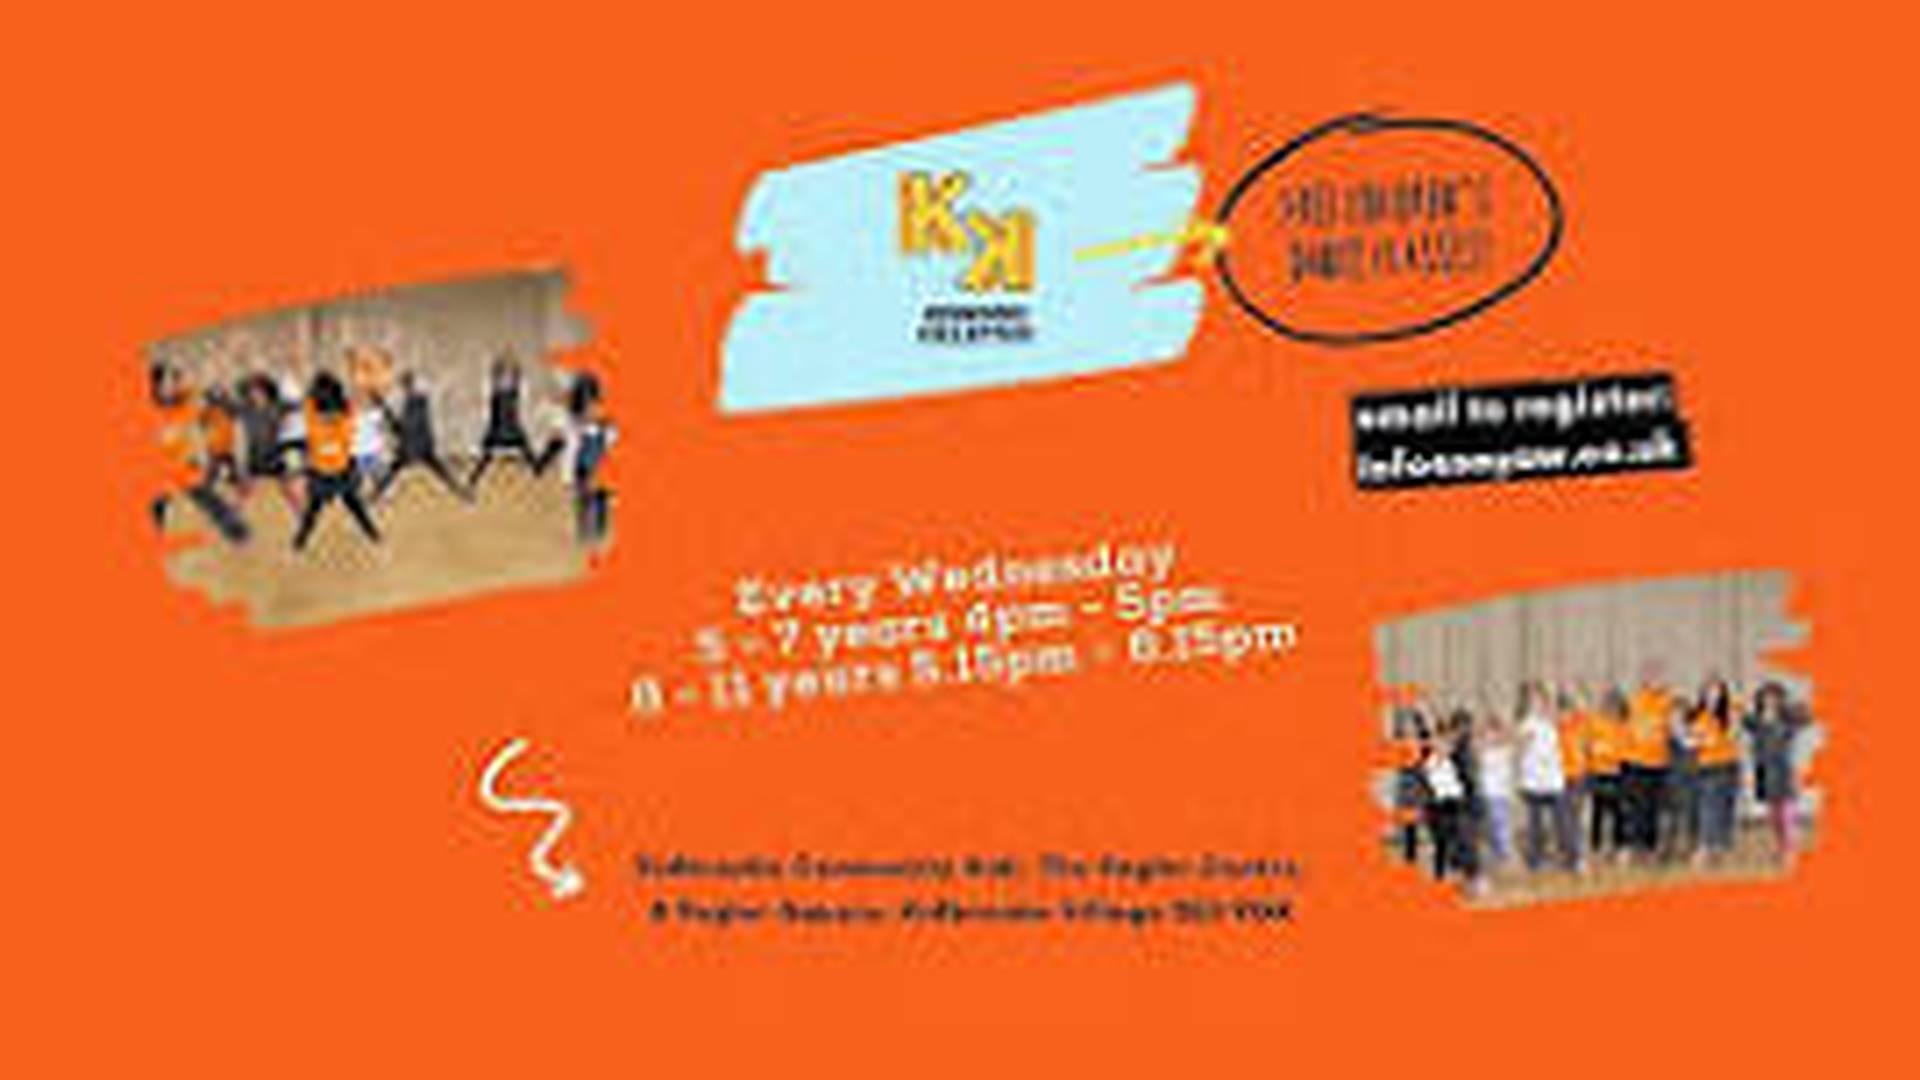 Free weekly dance sessions for children aged 5 - 11 in Kidbrooke Village photo